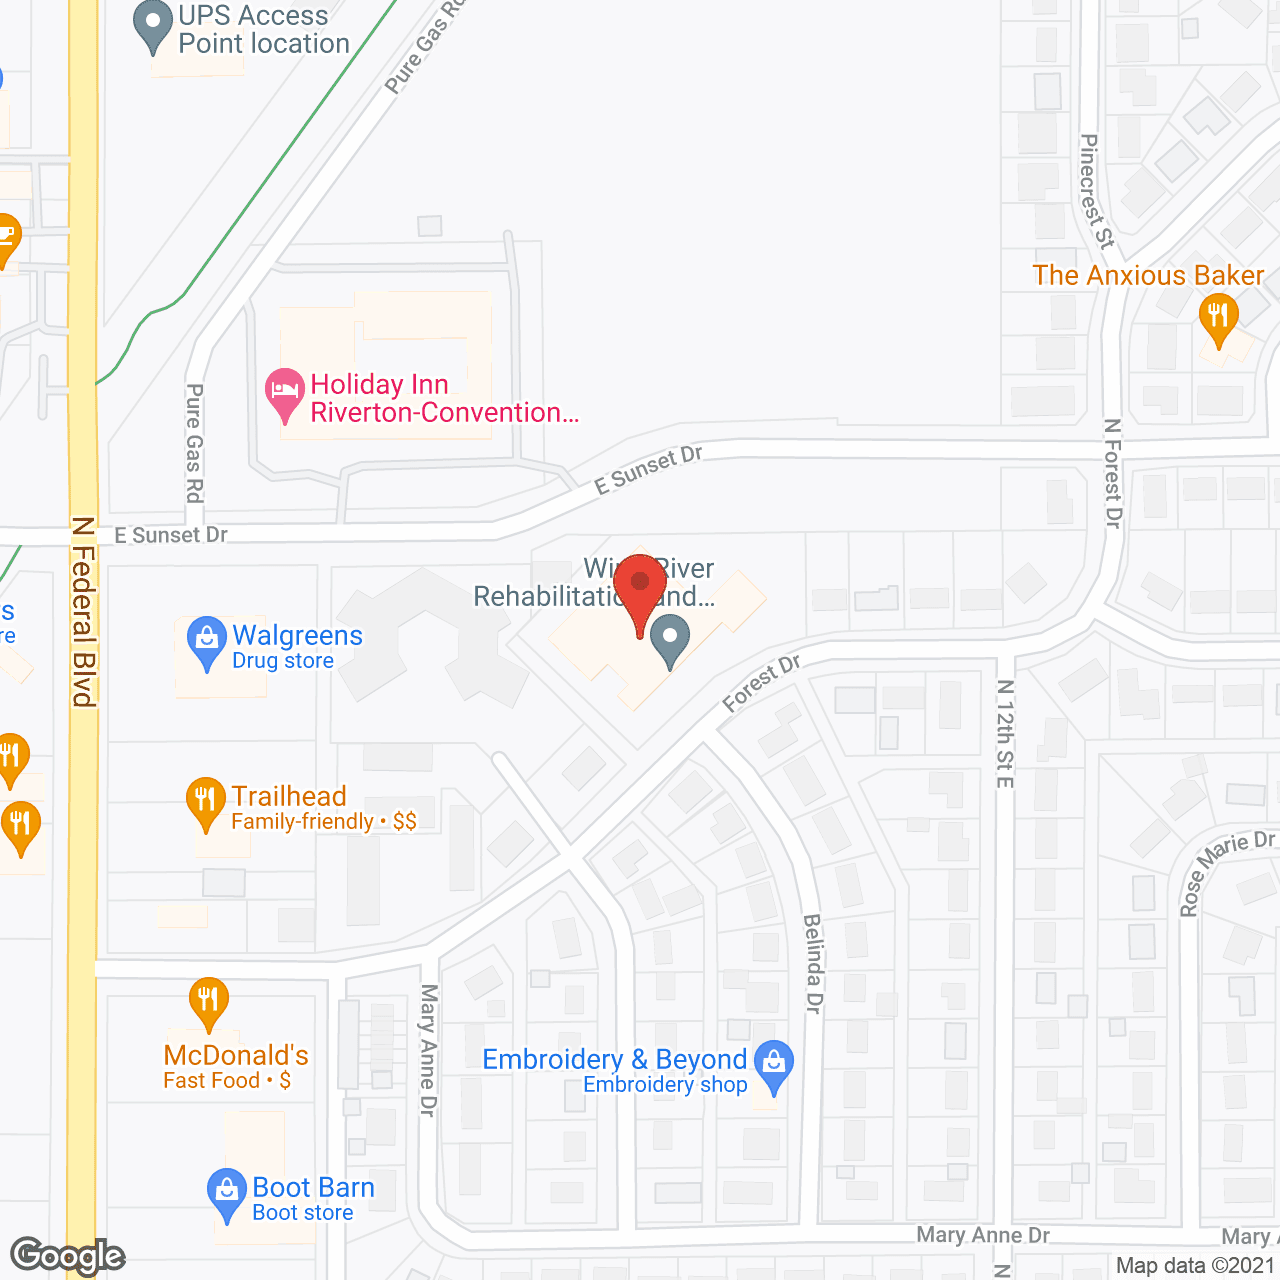 Wind River Healthcare and Rehabilitation Center in google map